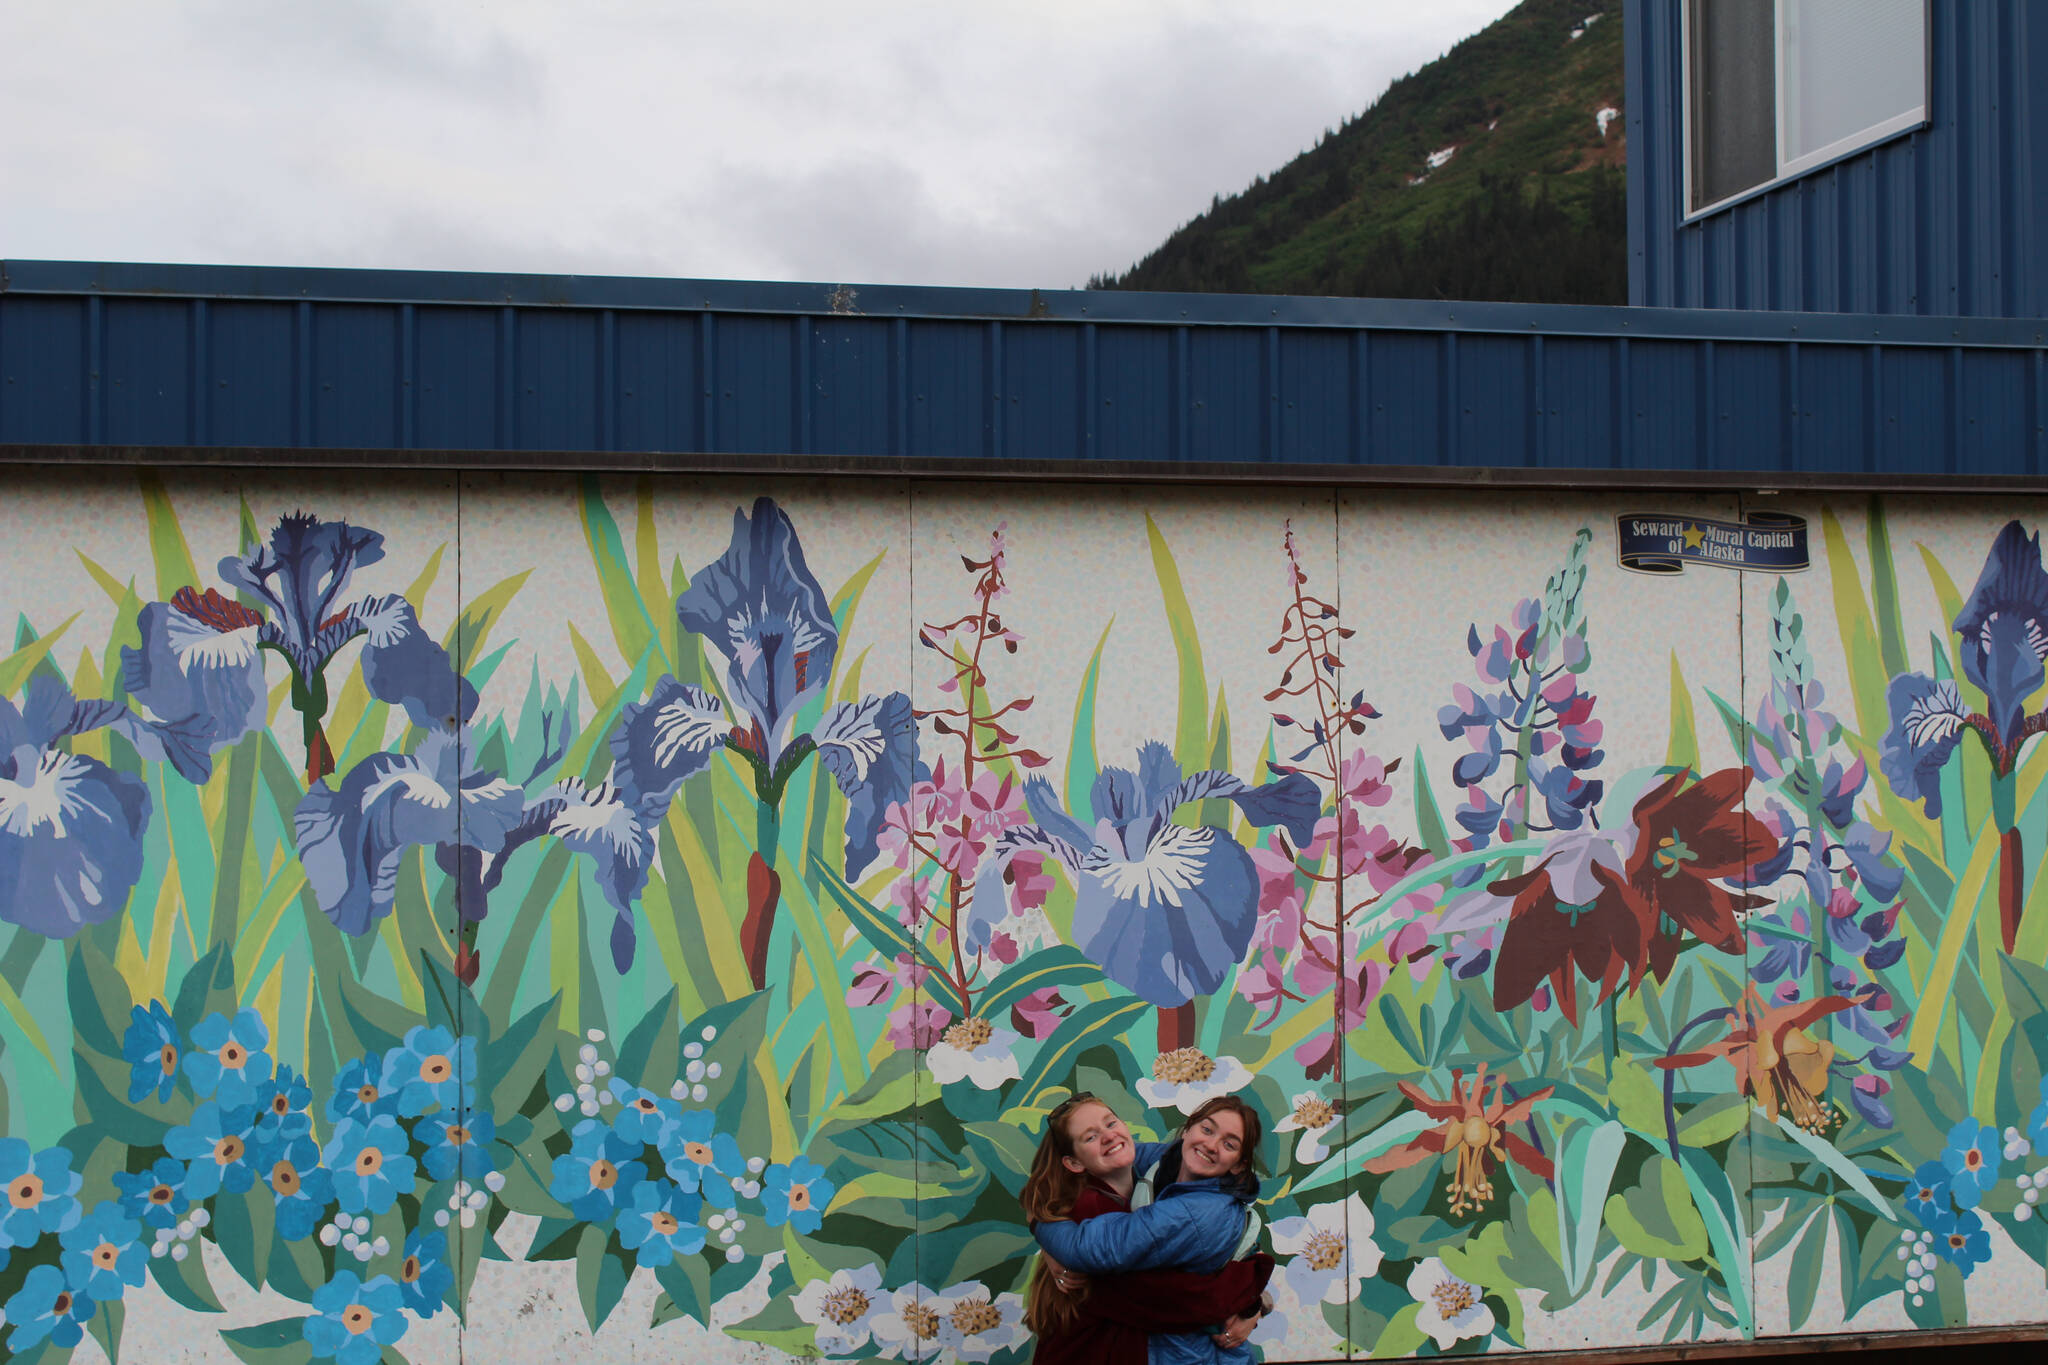 Anna and I in Seward, Alaska, on June 9, 2022 after waiting in Cooper Landing for almost three hours.